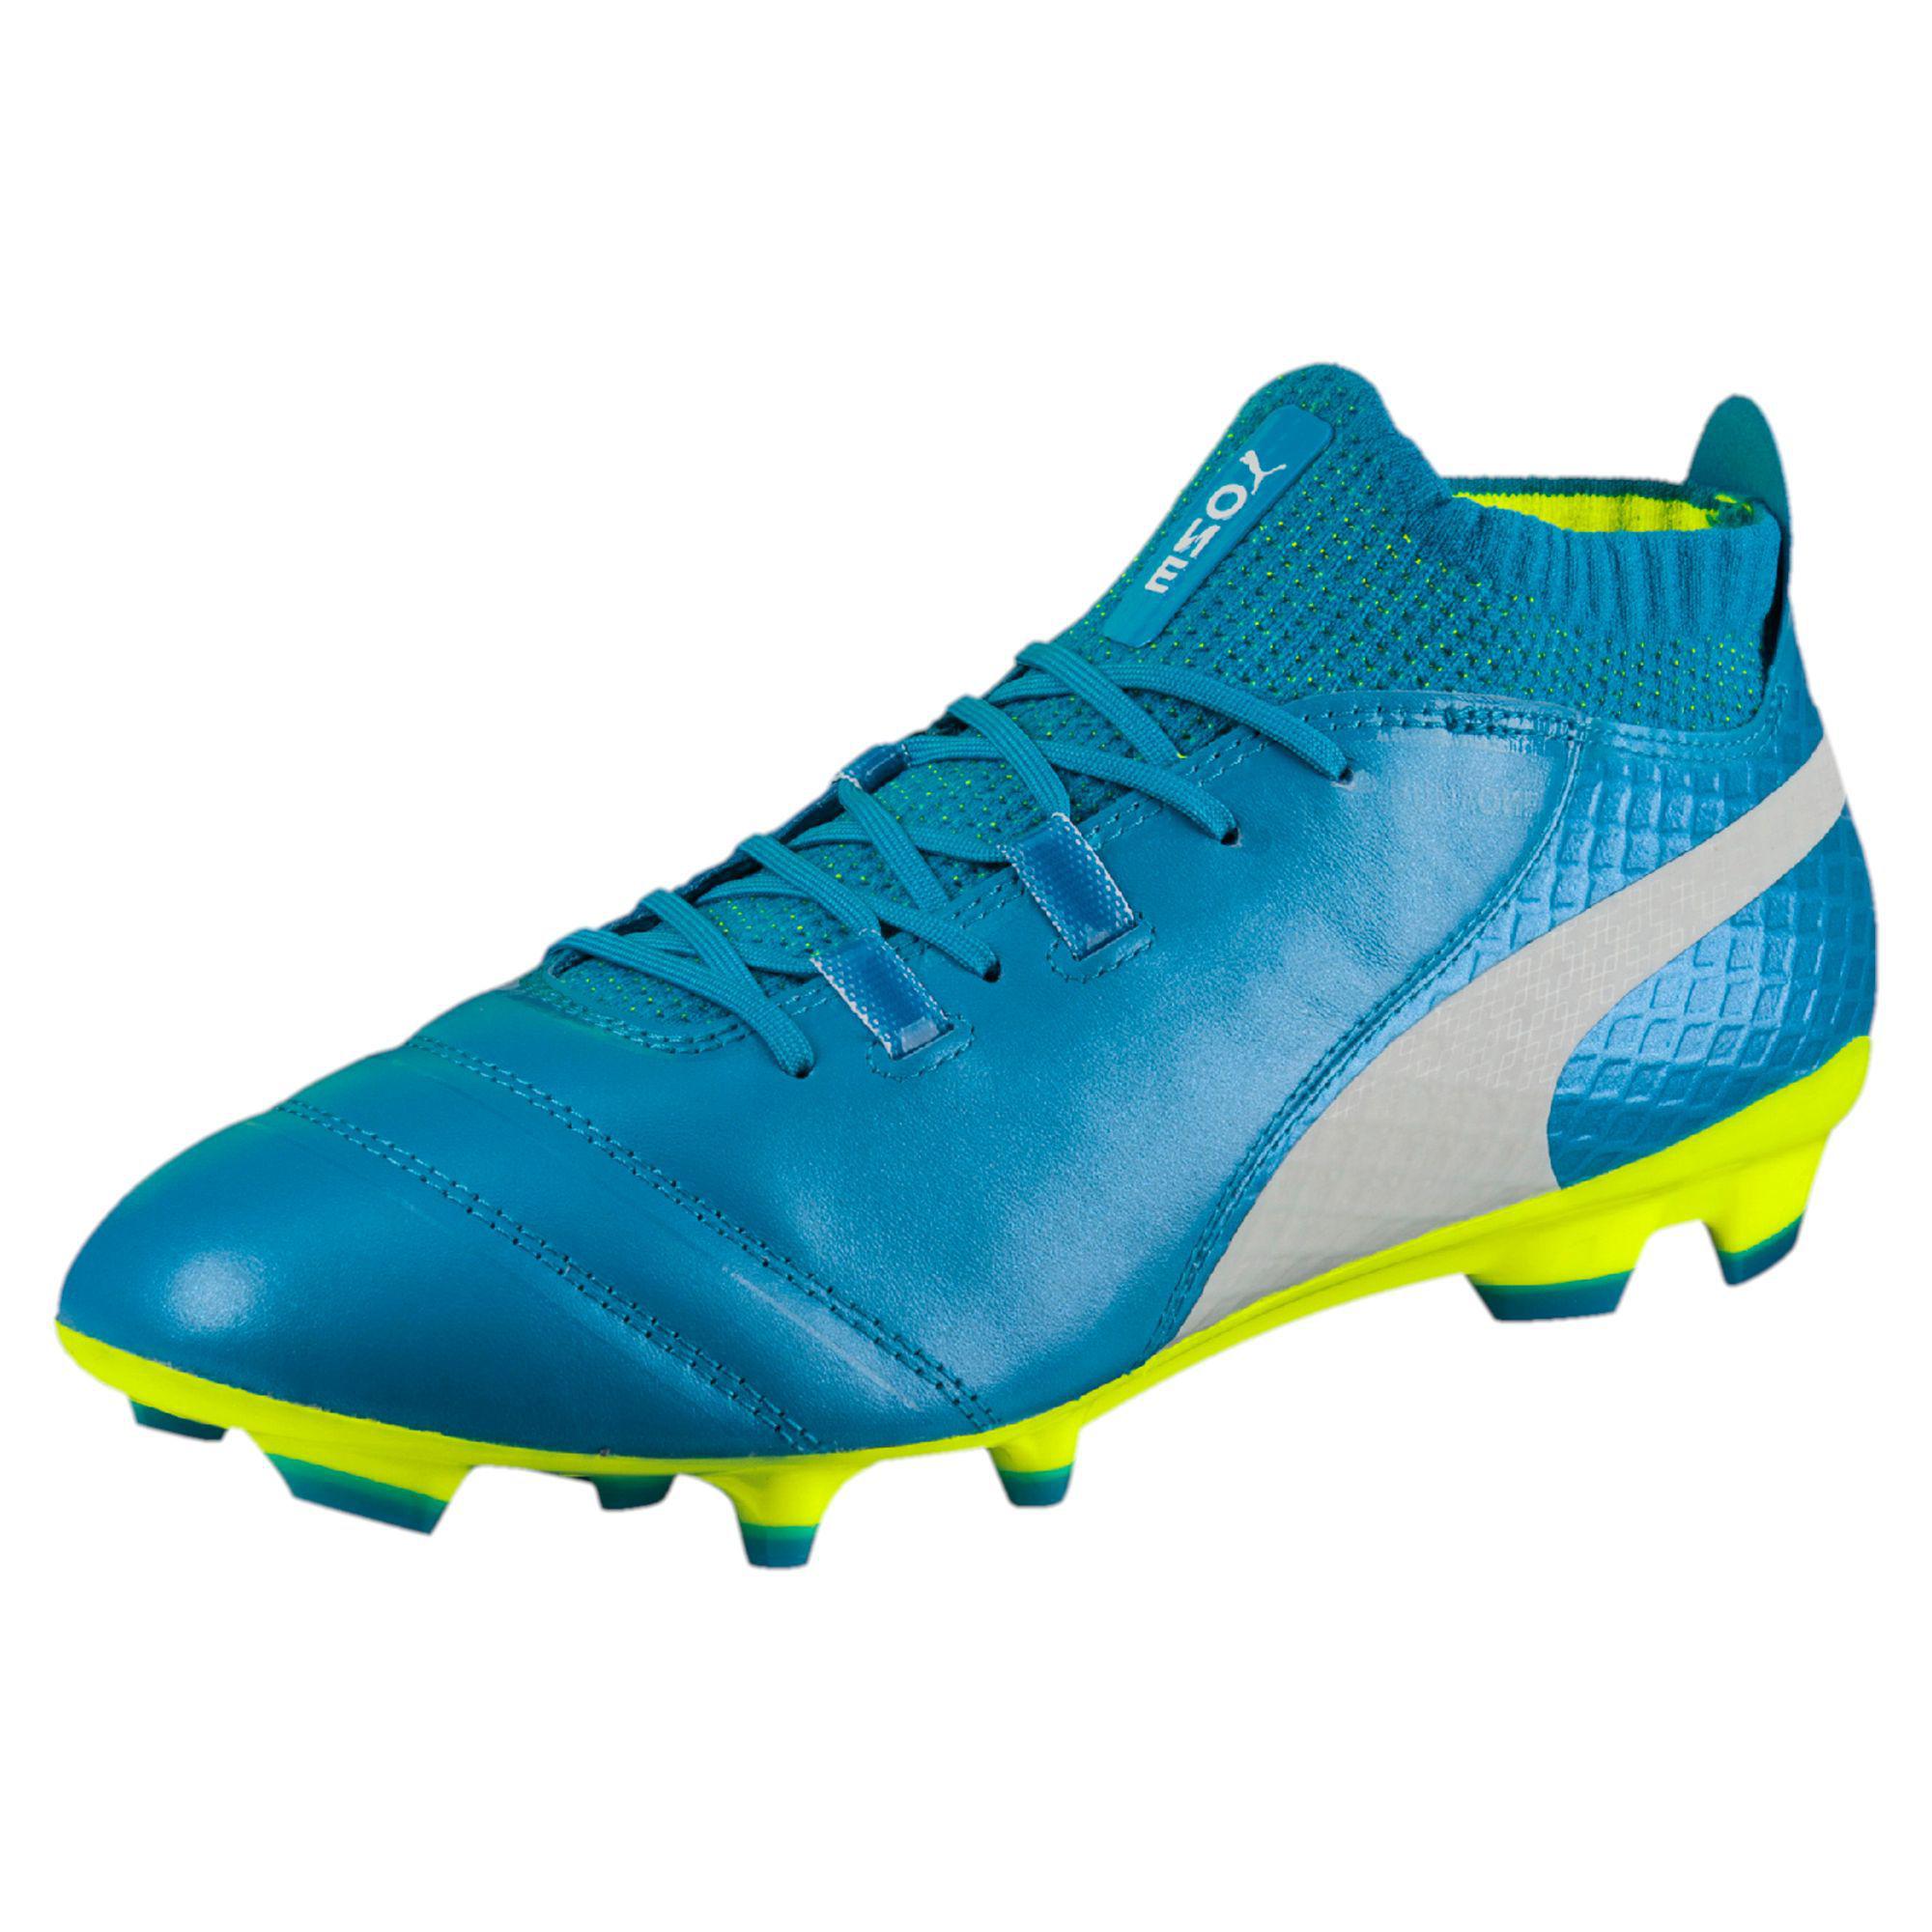 blue and yellow soccer cleats